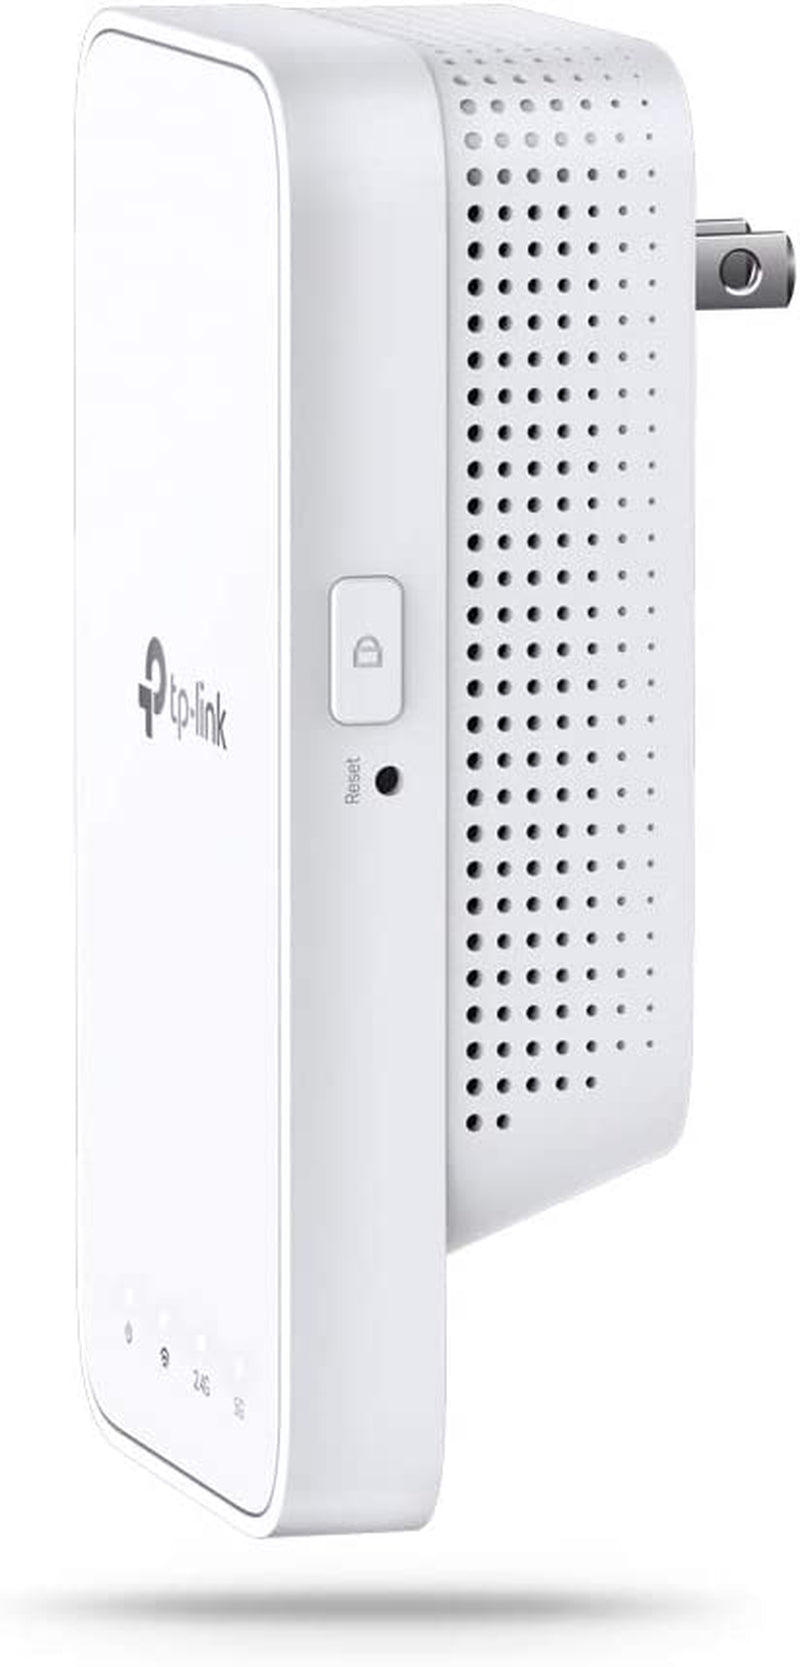 AC1200 Wifi Extender (RE300), Covers up to 1500 Sq.Ft and 25 Devices, up to 1200Mbps, Supports Onemesh, Dual Band Internet Repeater, Range Booster